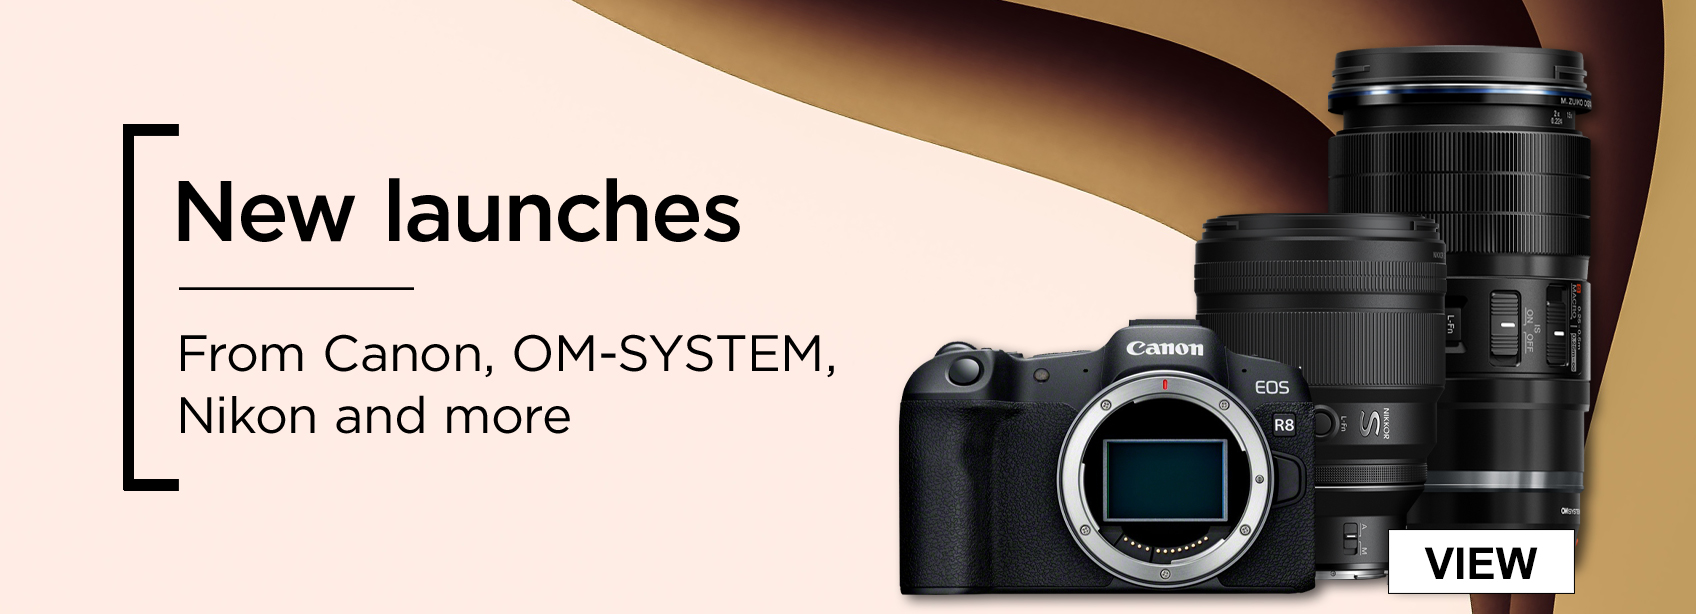 New launches from Canon, OM SYSTEM, Nikon and more 